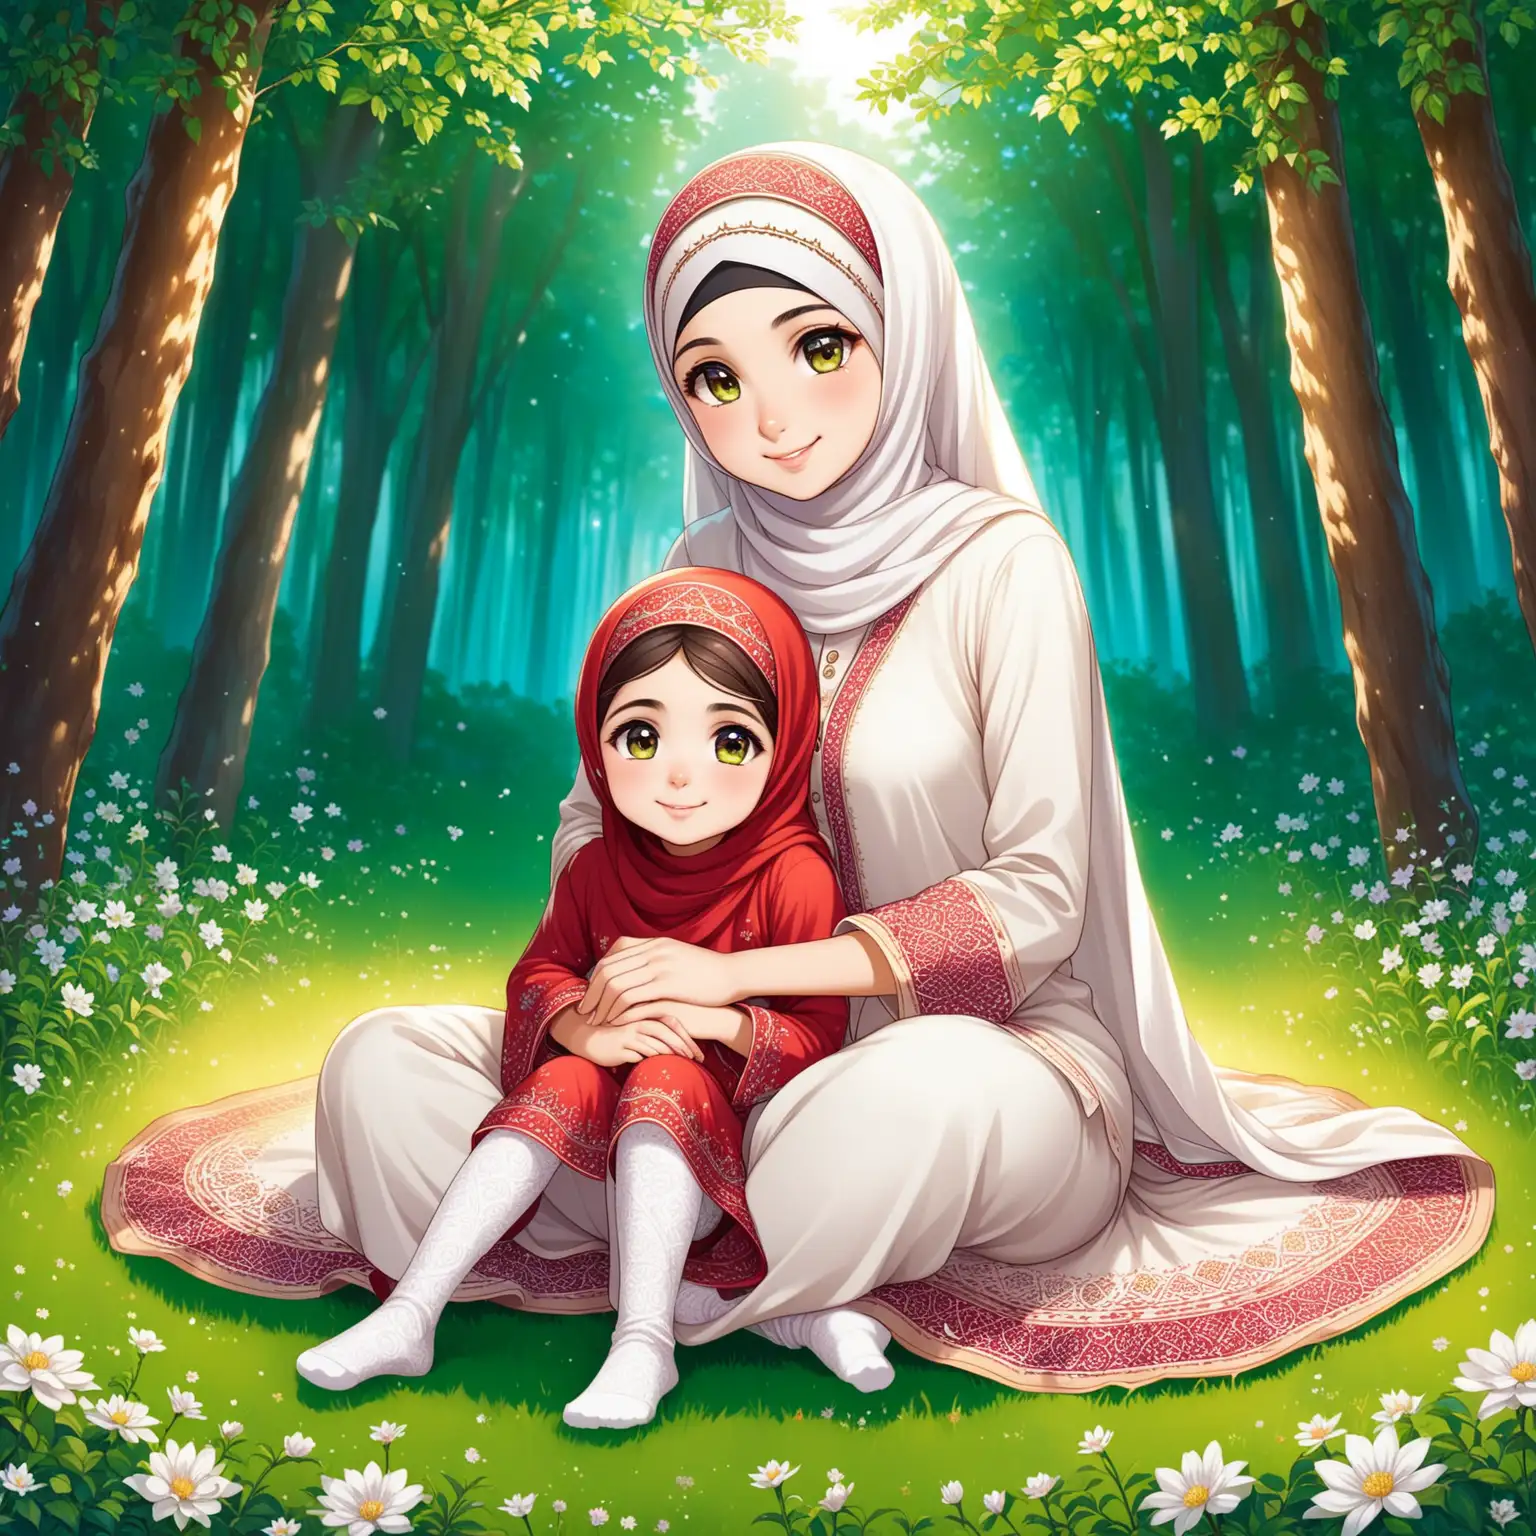 Persian Girl Fatemeh and Mother Roqayeh Enjoying Nature Together